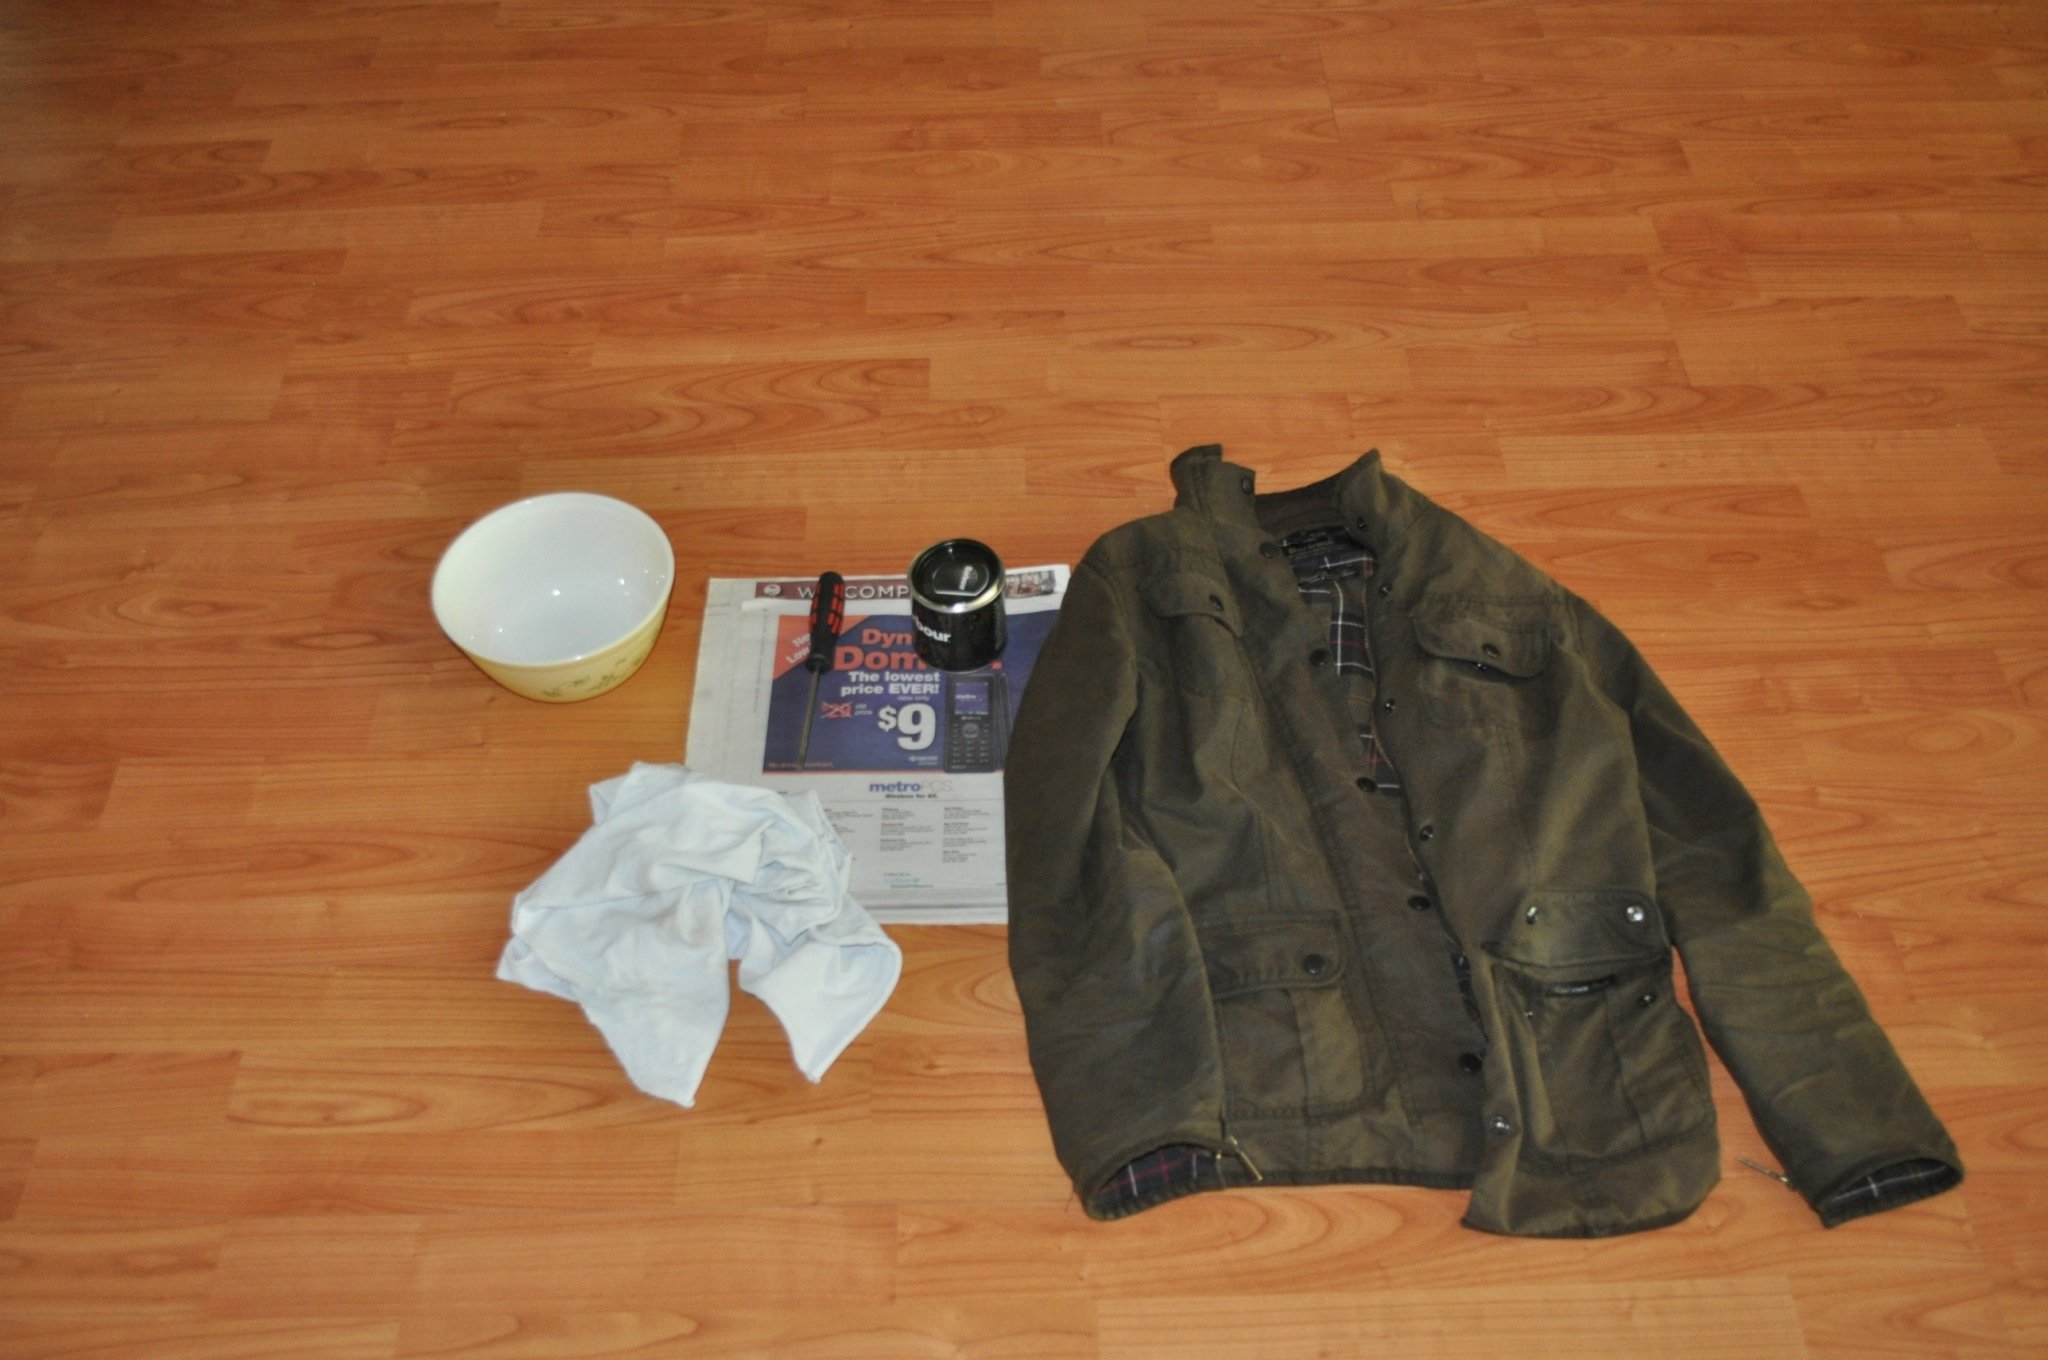 barbour dry wax reproofing stick